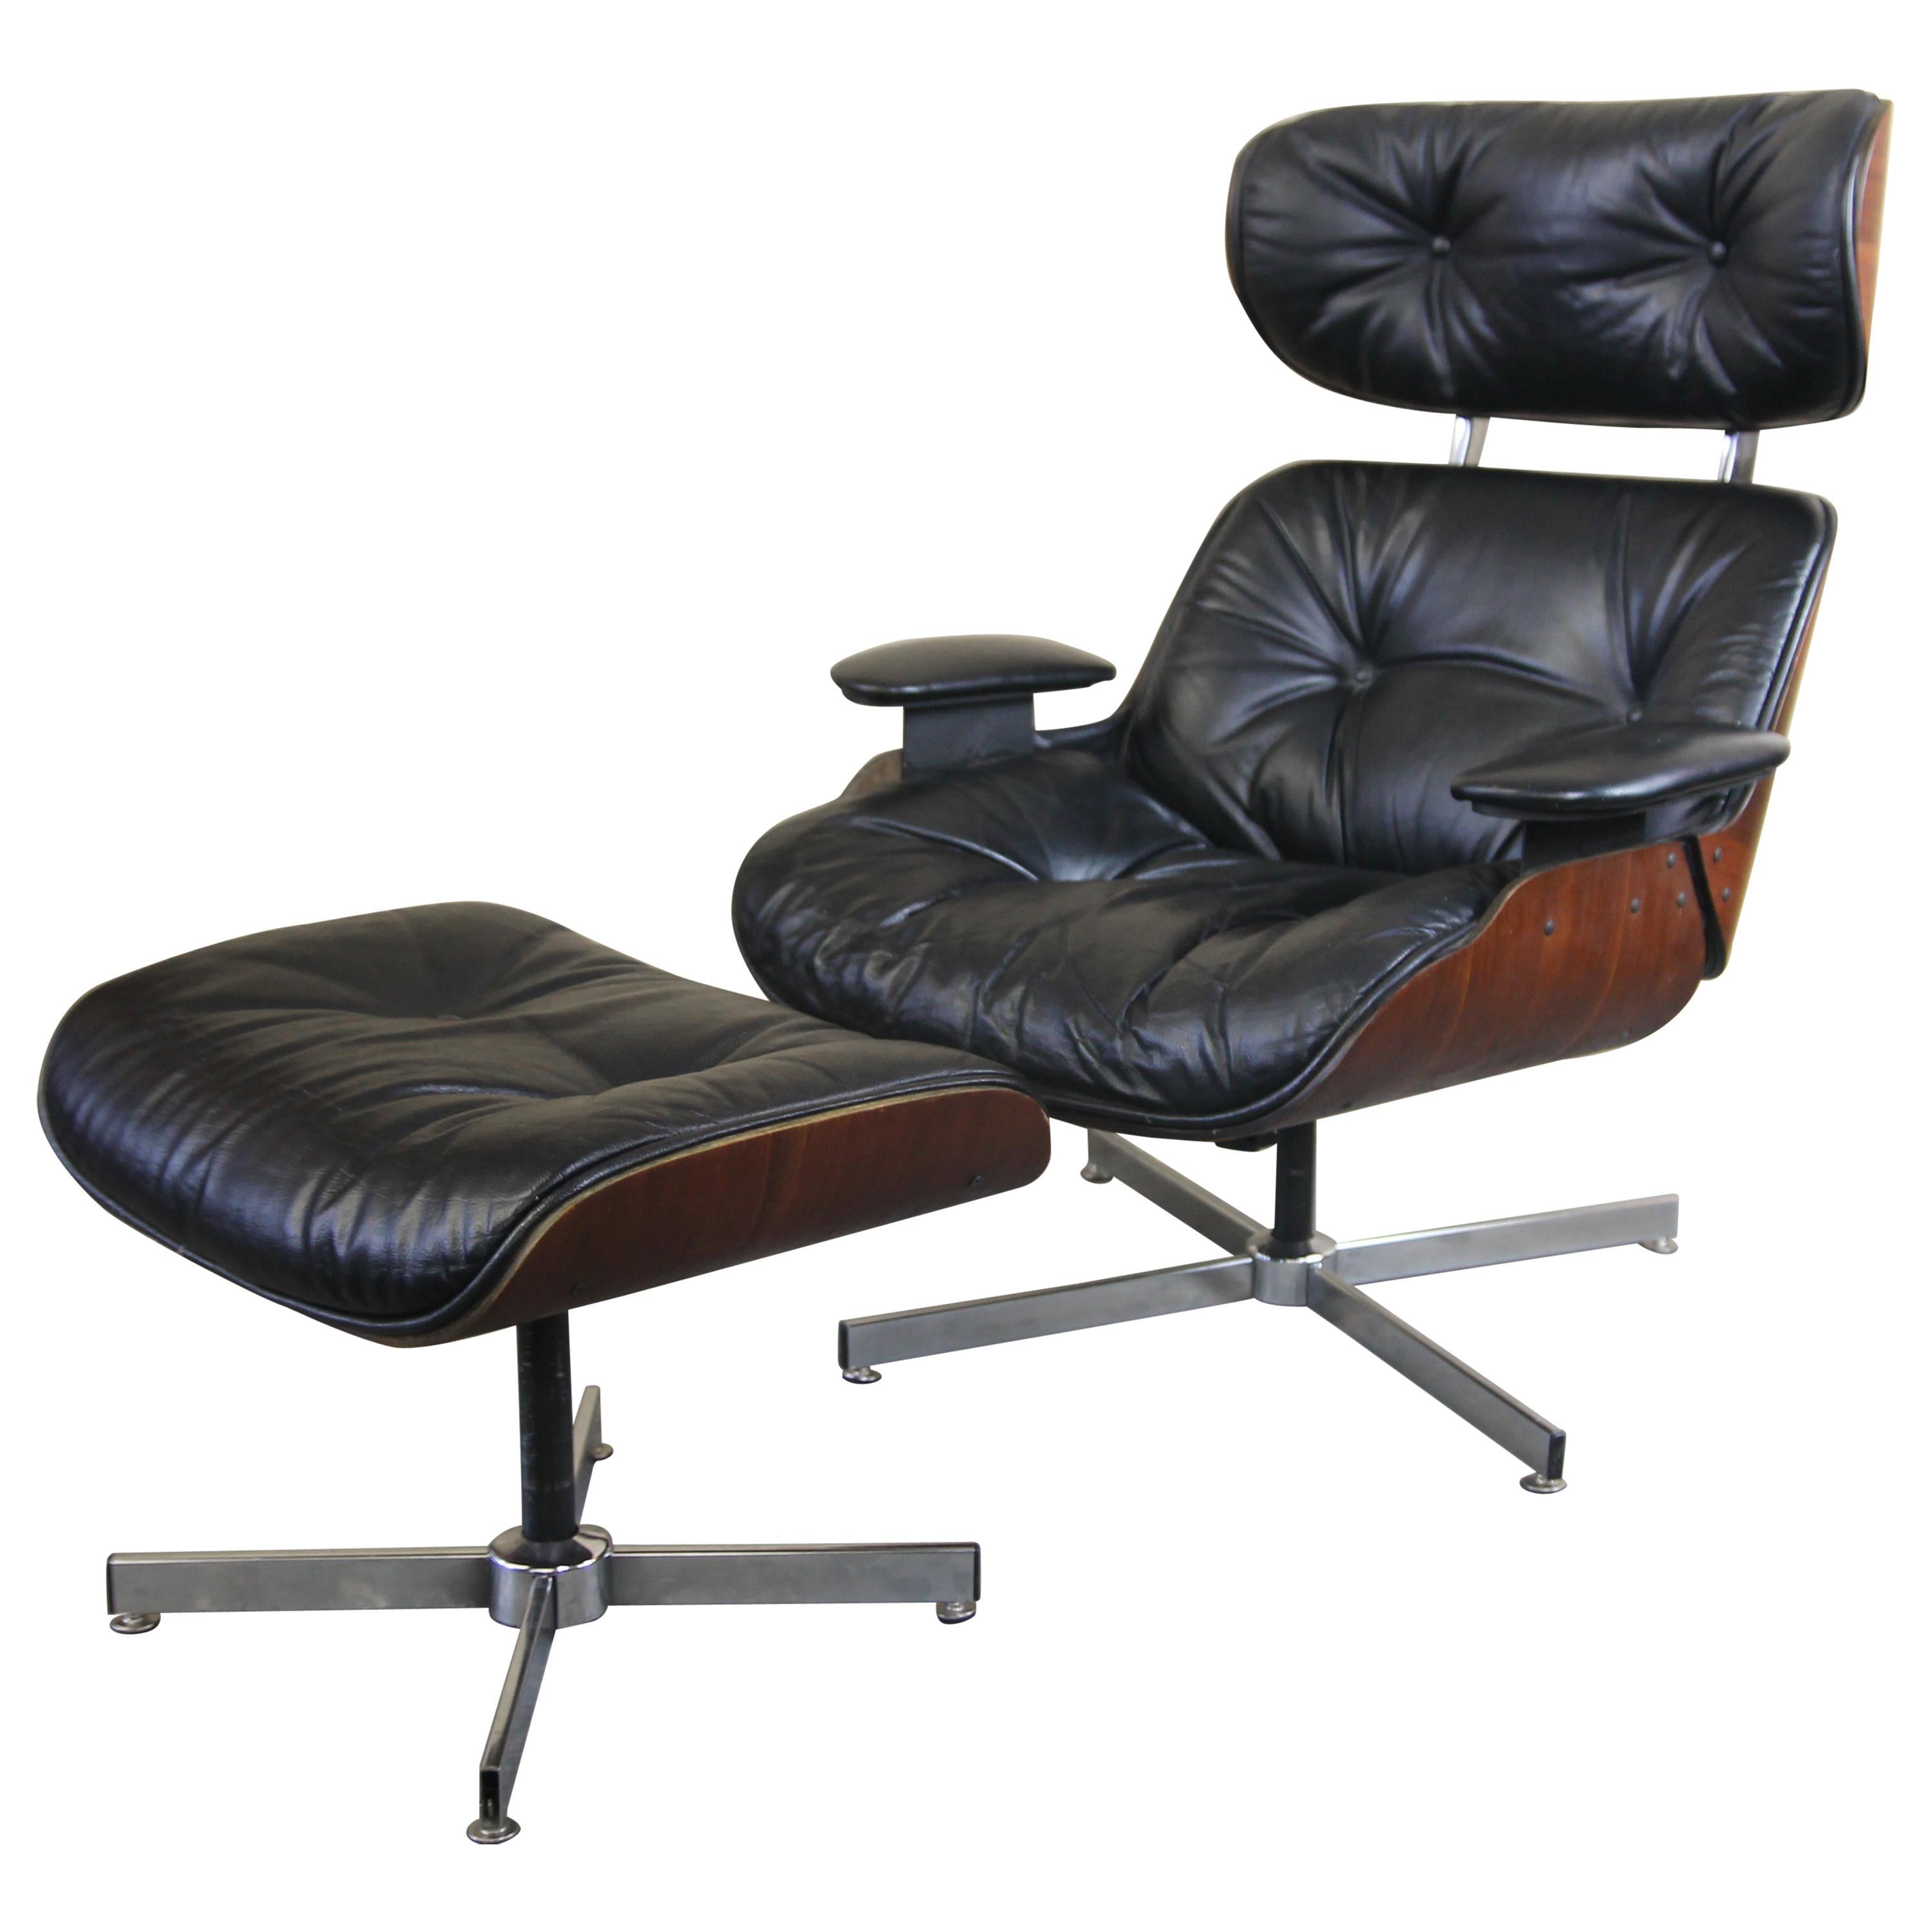 Lounge Chair by Selig in the Style of the Eames 670